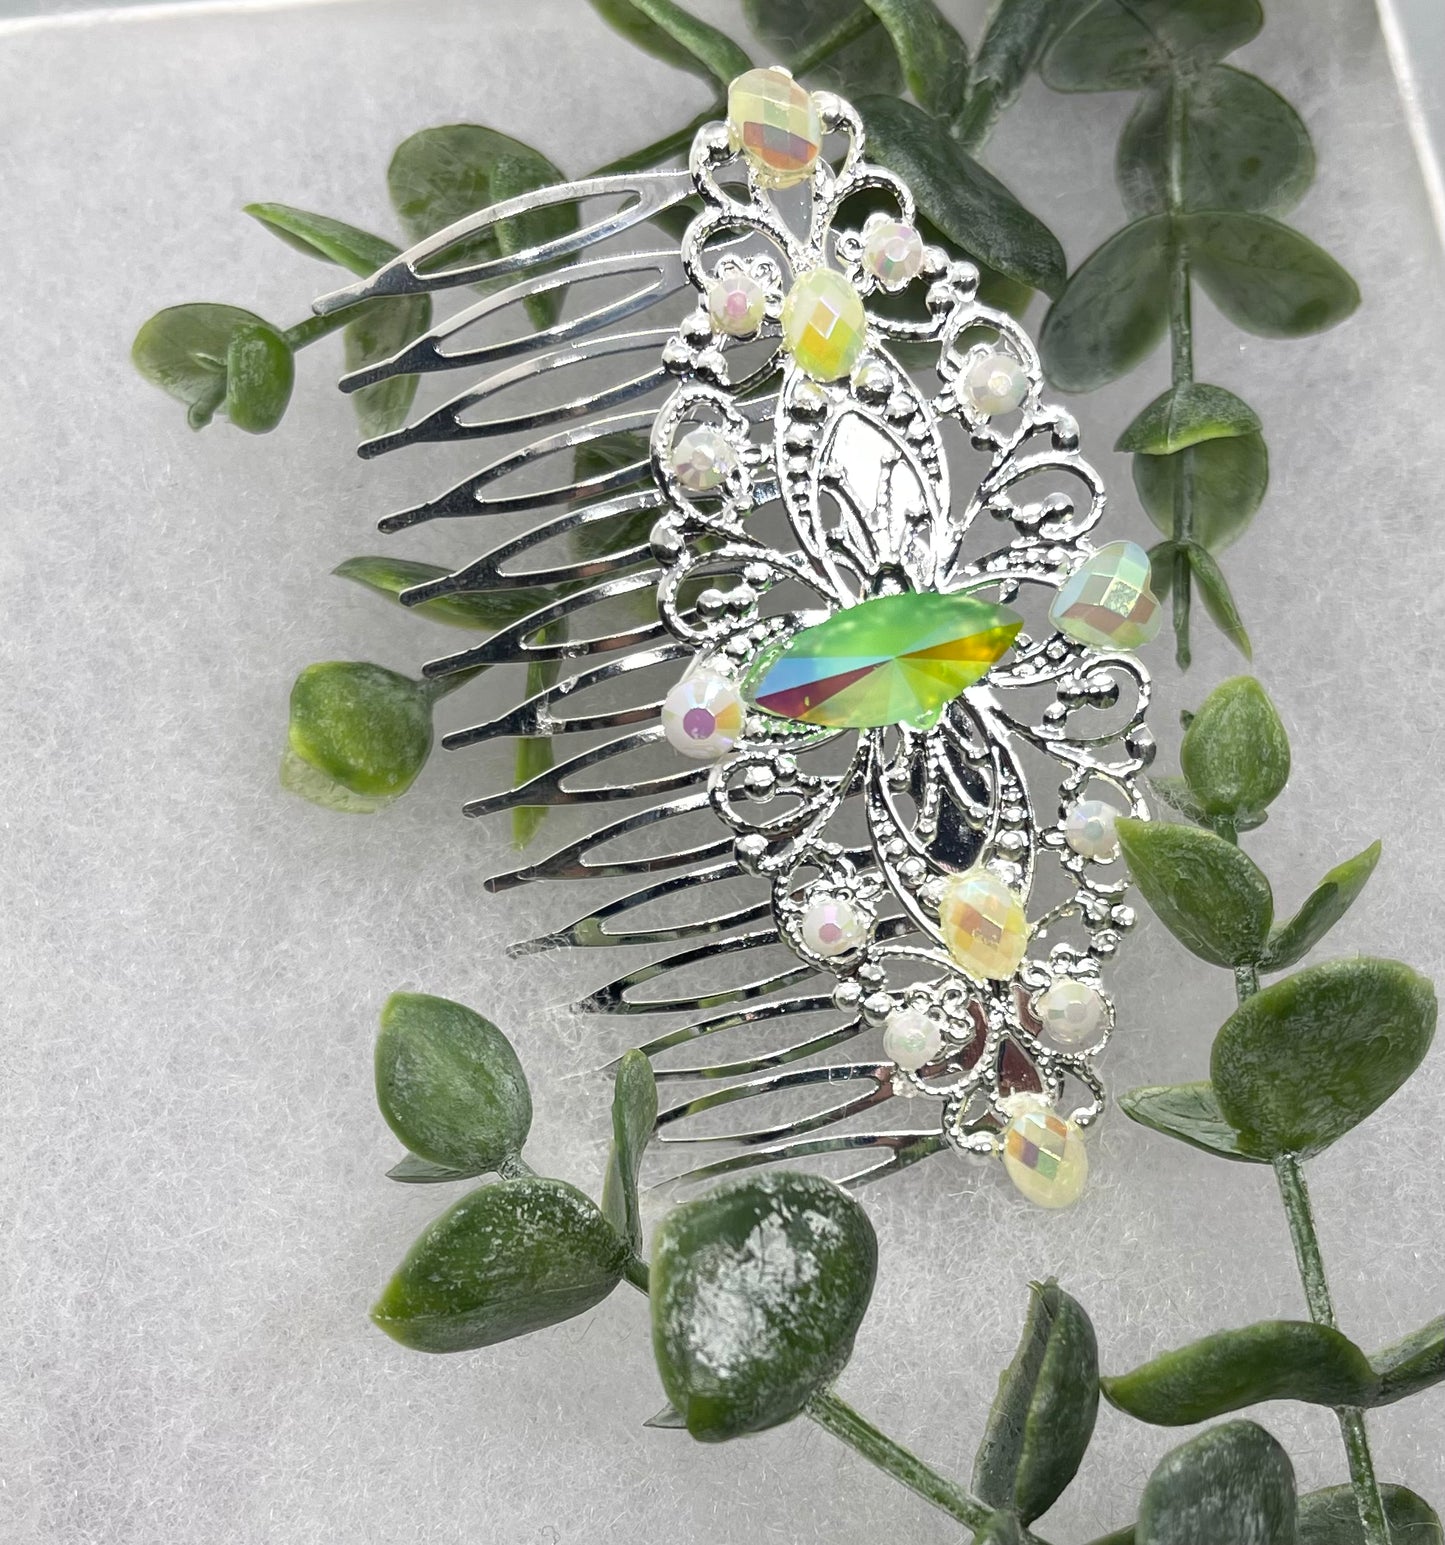 Iridescent Vintage Style Crystal Rhinestone 3.5” silver tone Metal side Comb bridal accents handmade by hairdazzzel wedding accessor